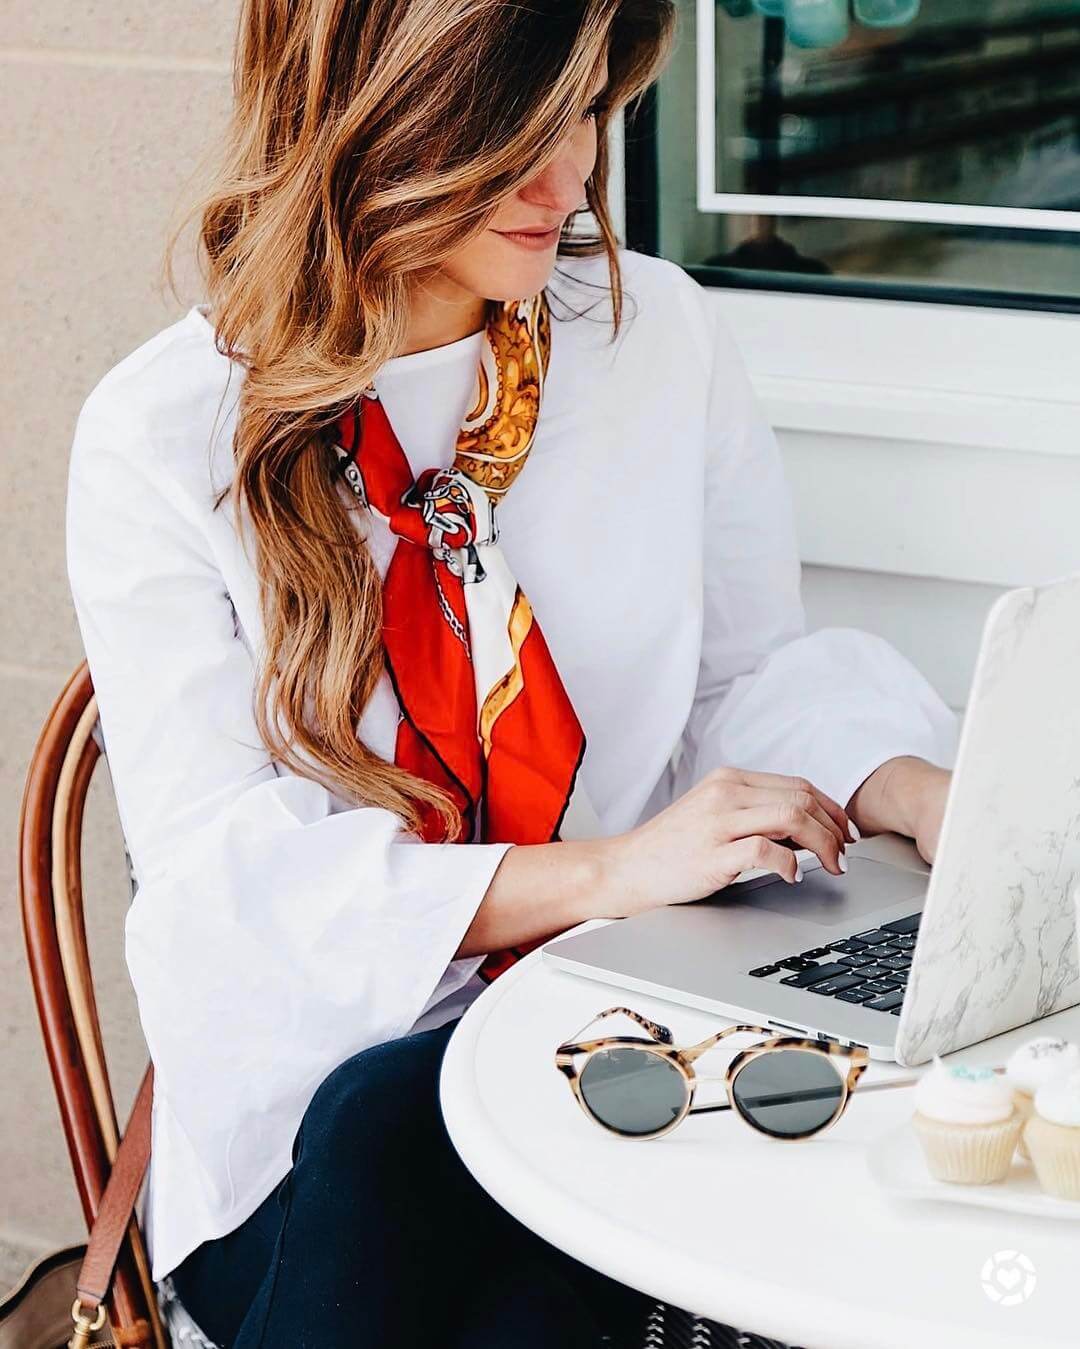 brighton keller at Bird Bakery Dallas wearing white blouse, neck scarf, and sonic sunglasses 